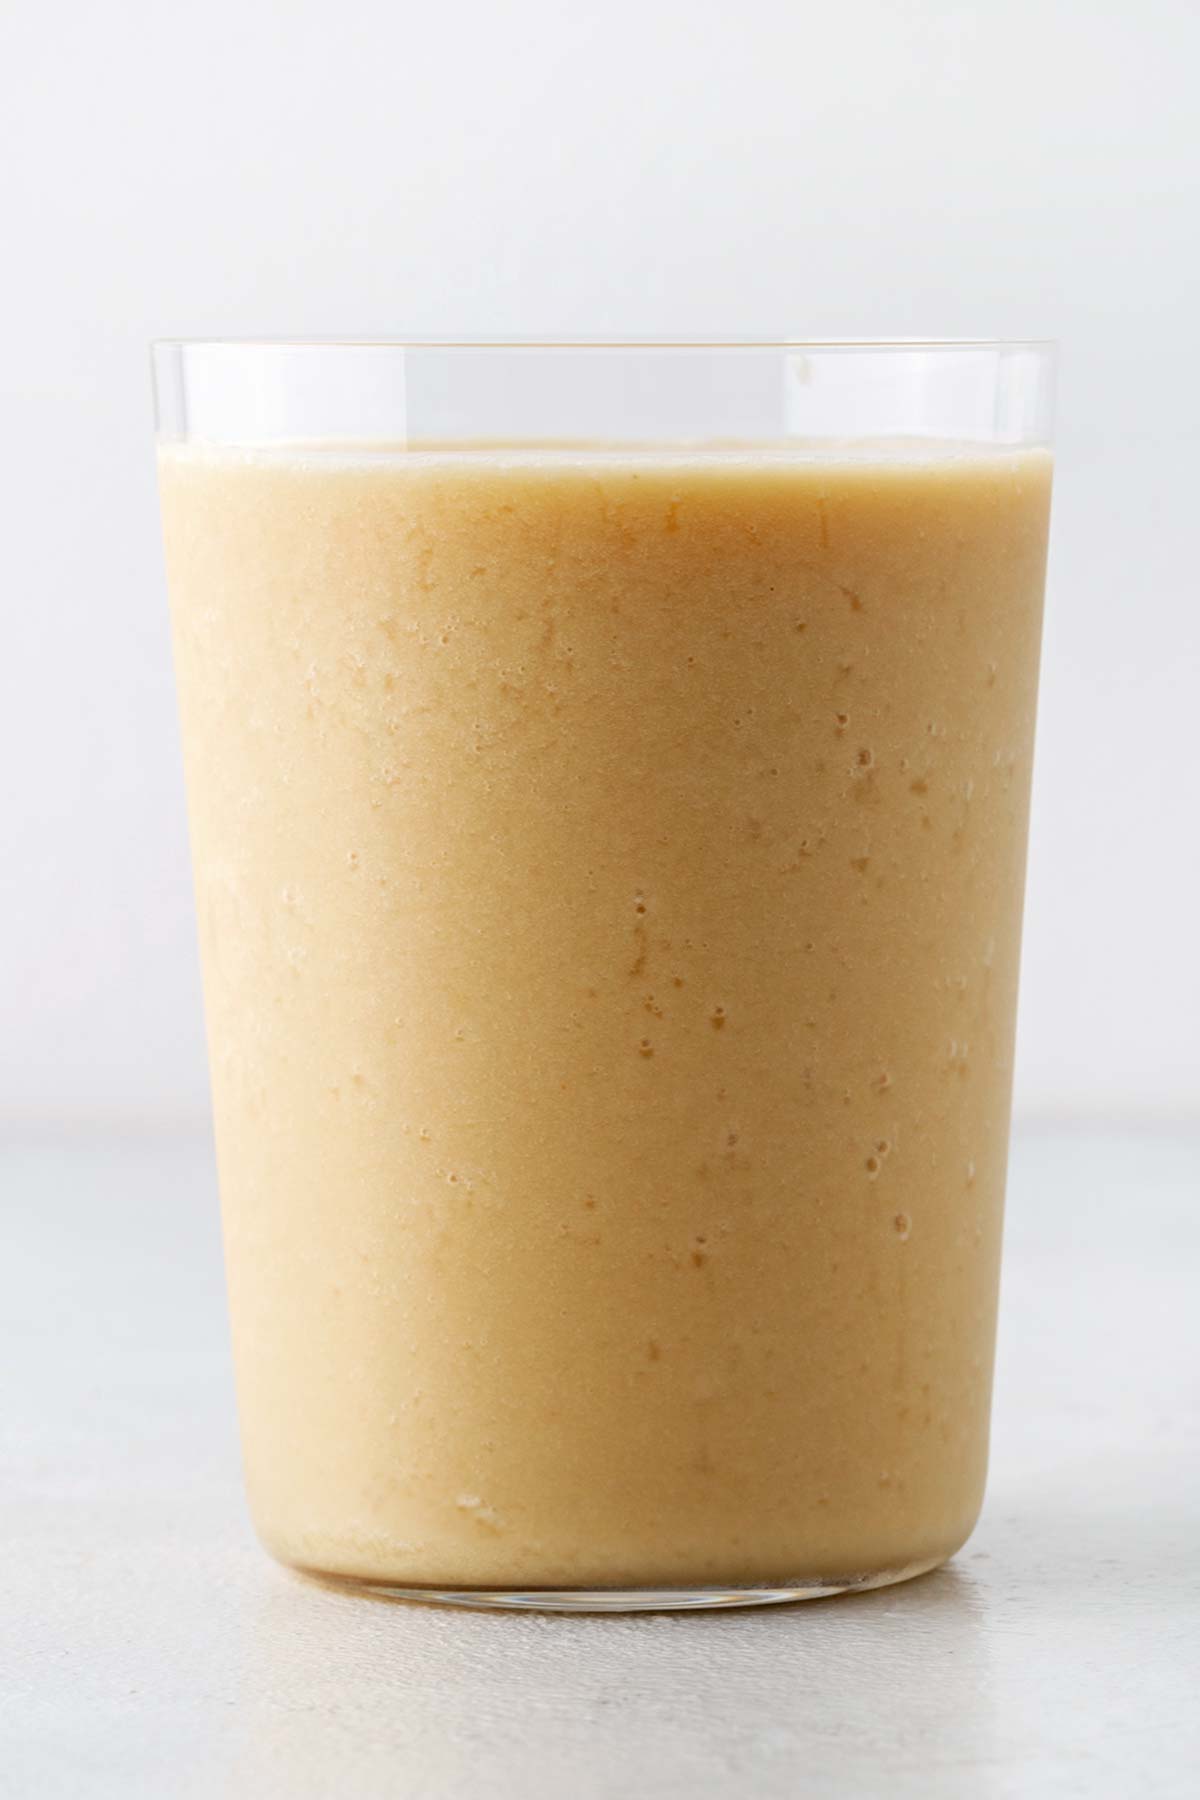 Pineapple Ginger smoothie in a glass.